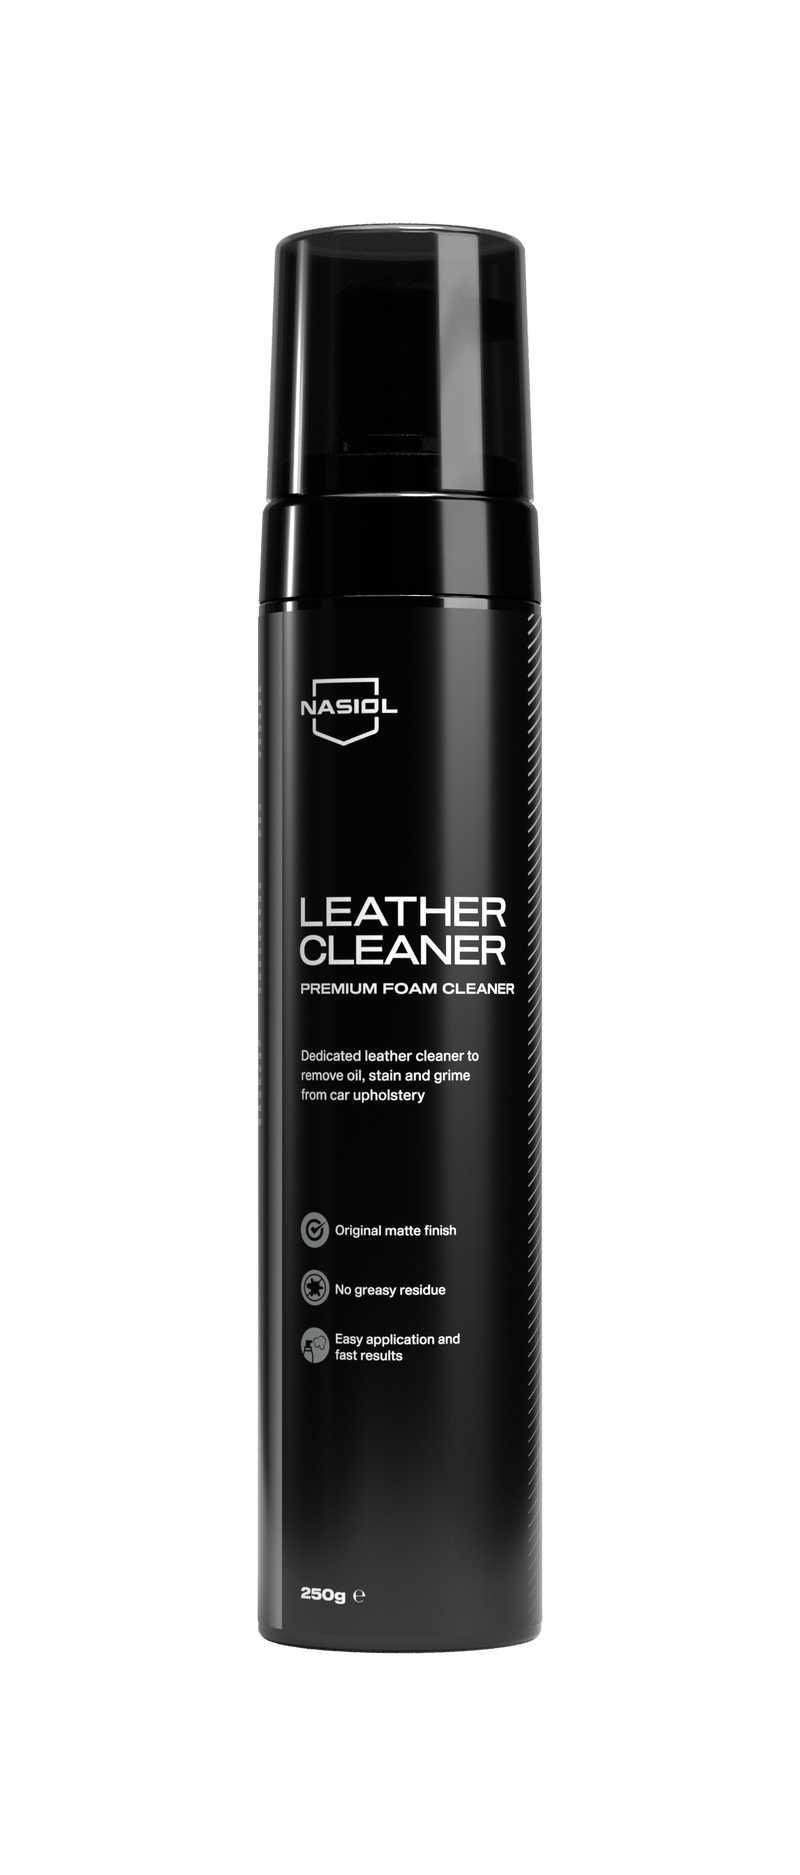 Nasiol Leather Cleaner 250g